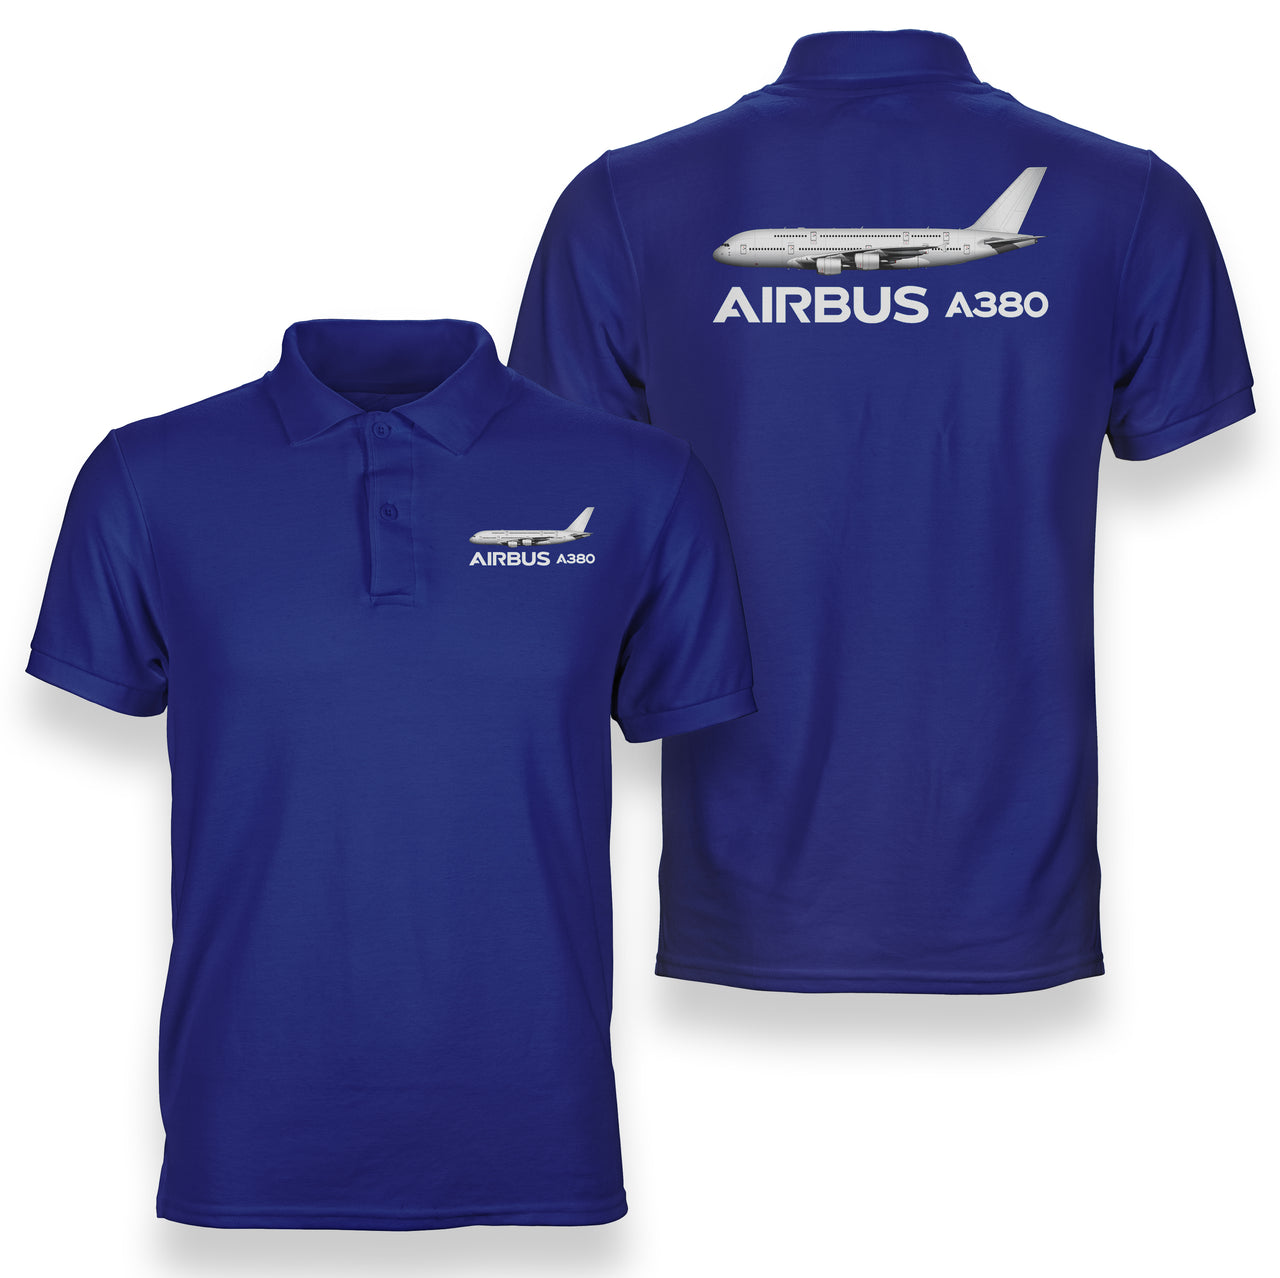 The Airbus A380 Designed Double Side Polo T-Shirts